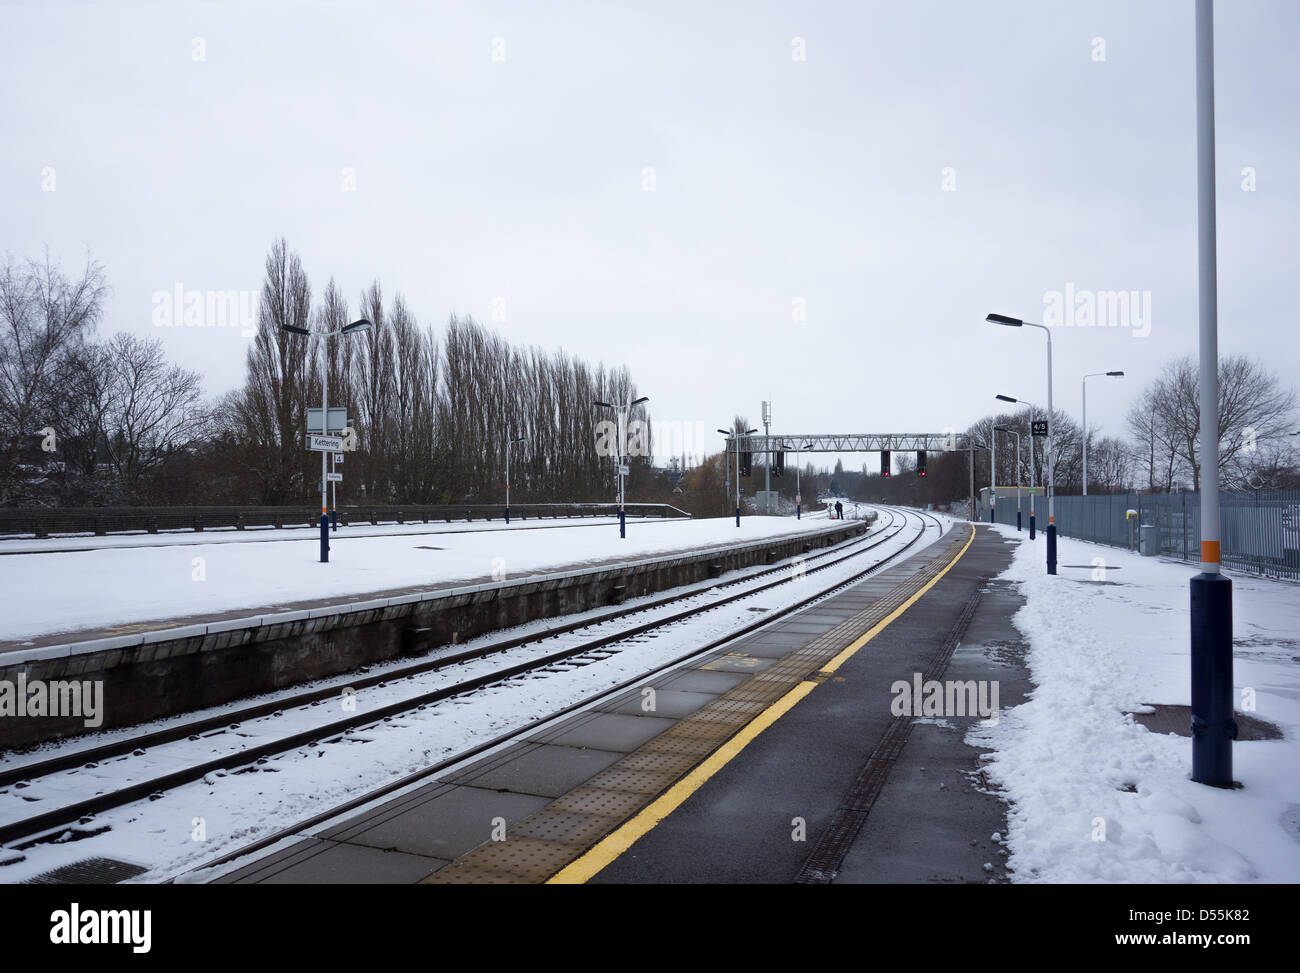 Kettering, Northamptonshire. 24th March, 2013. Kettering railway station was kept open and pasengers could safely walk along the platform despite the snow which engulfed much of the UK. Credit: Miscellaney/Alamy Live News Stock Photo